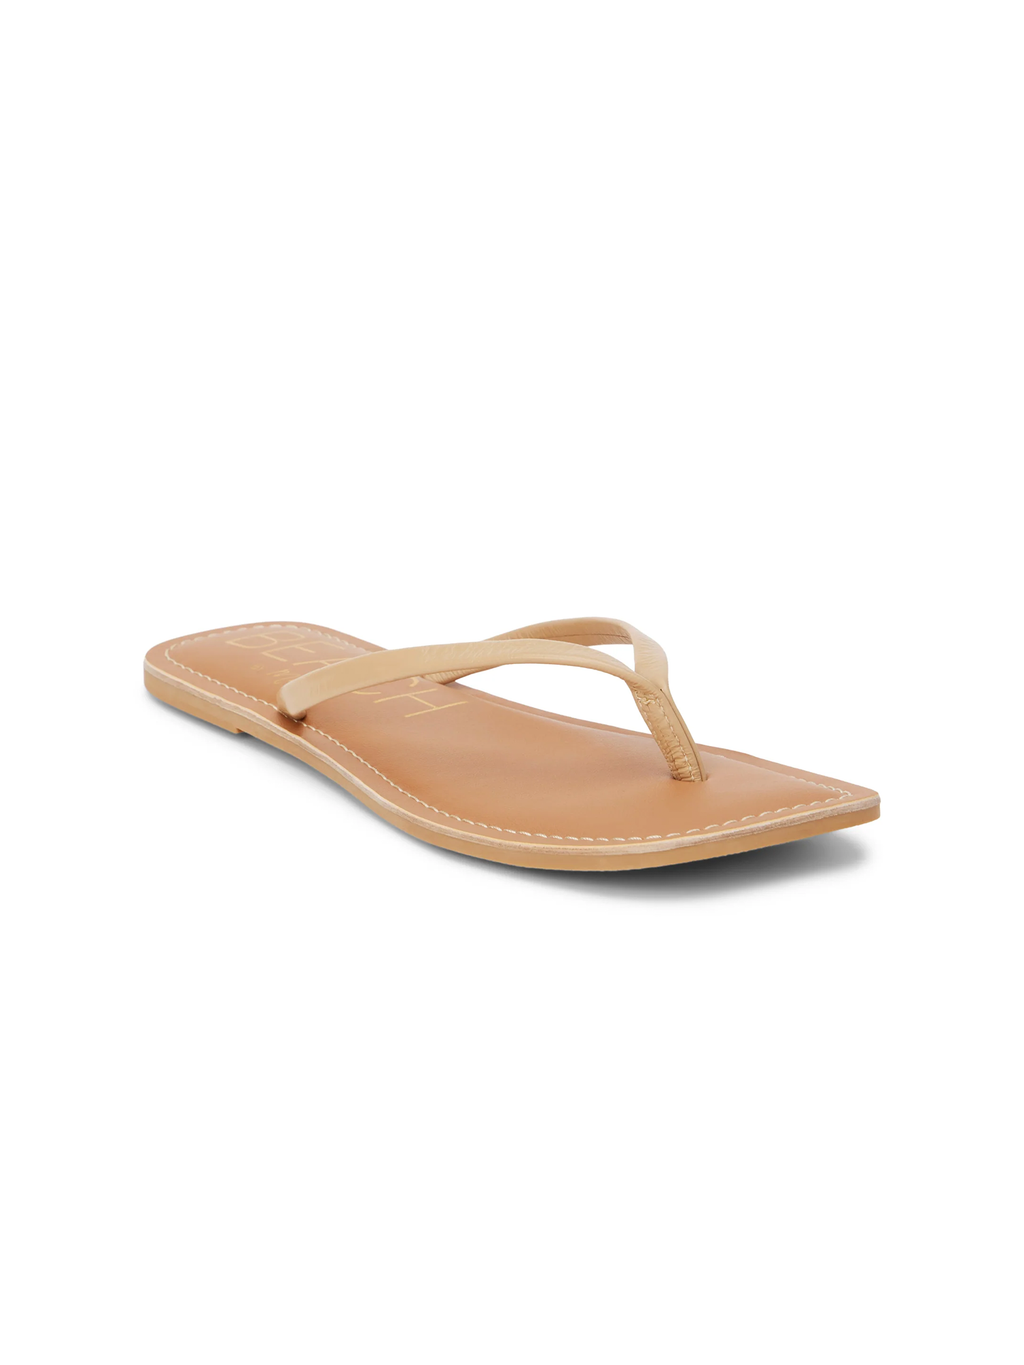 Bungalow Sandal in Natural - Stitch And Feather